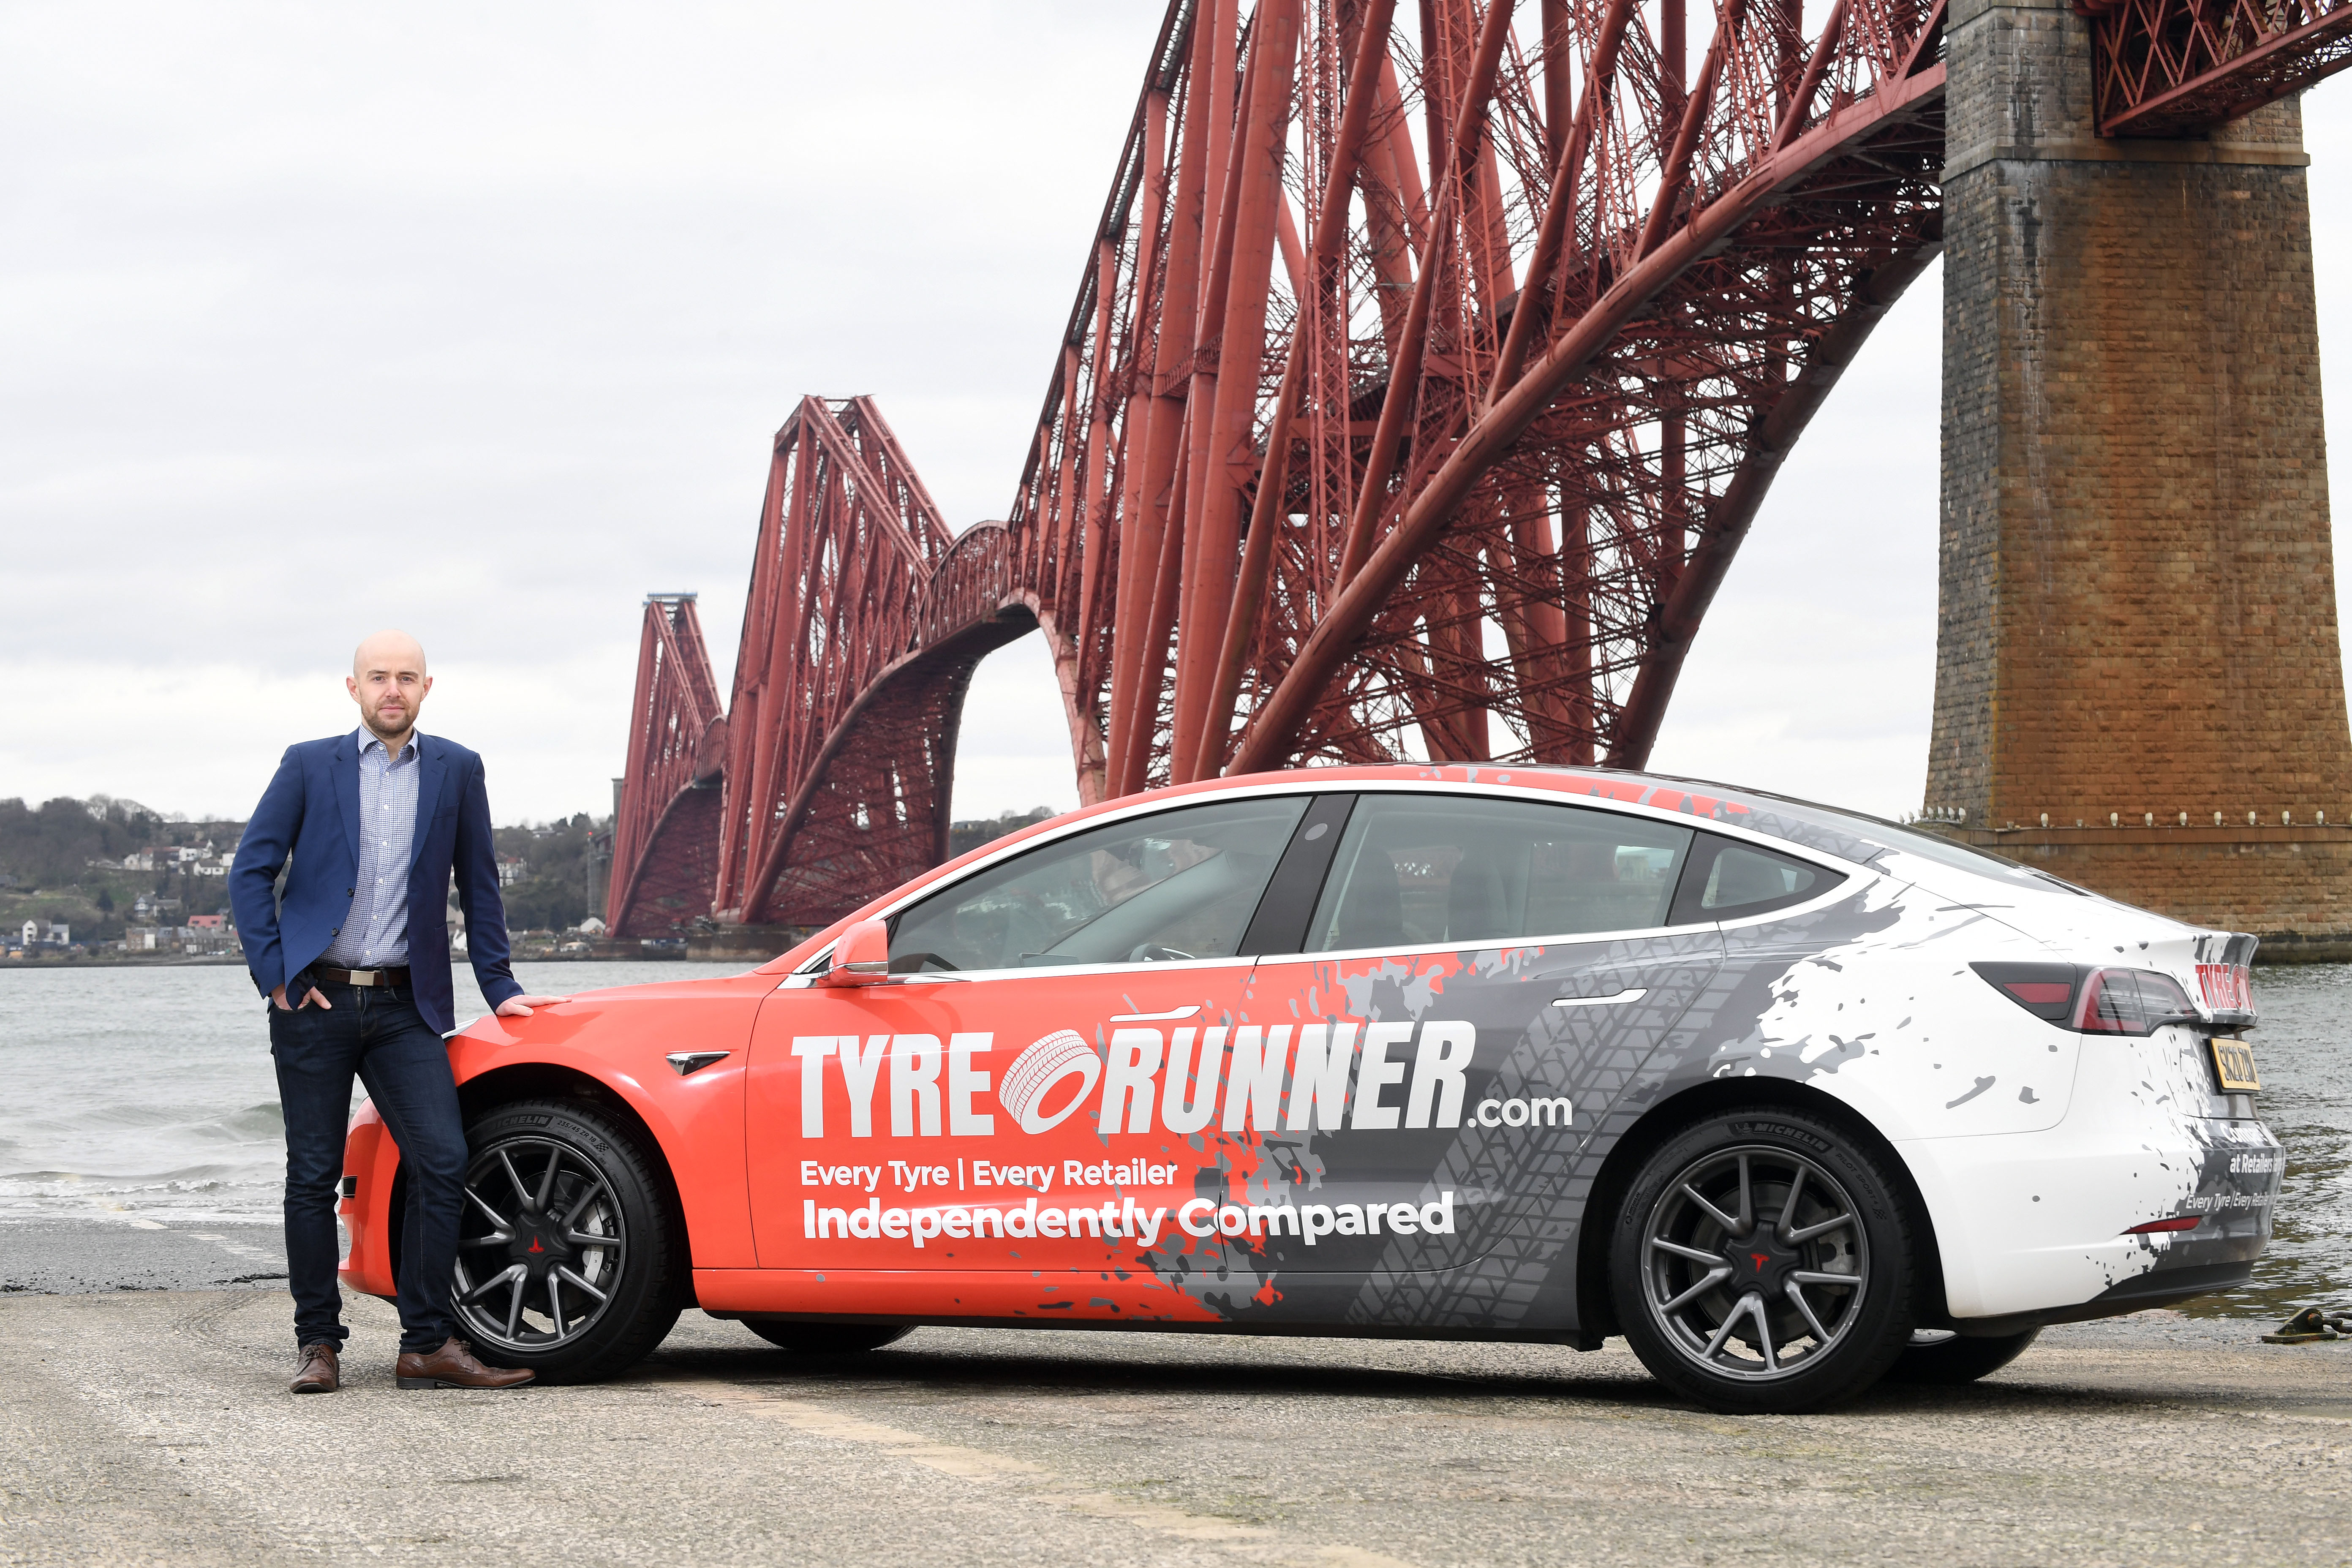 TyreRunner.com reports 800% growth as it eyes further expansion